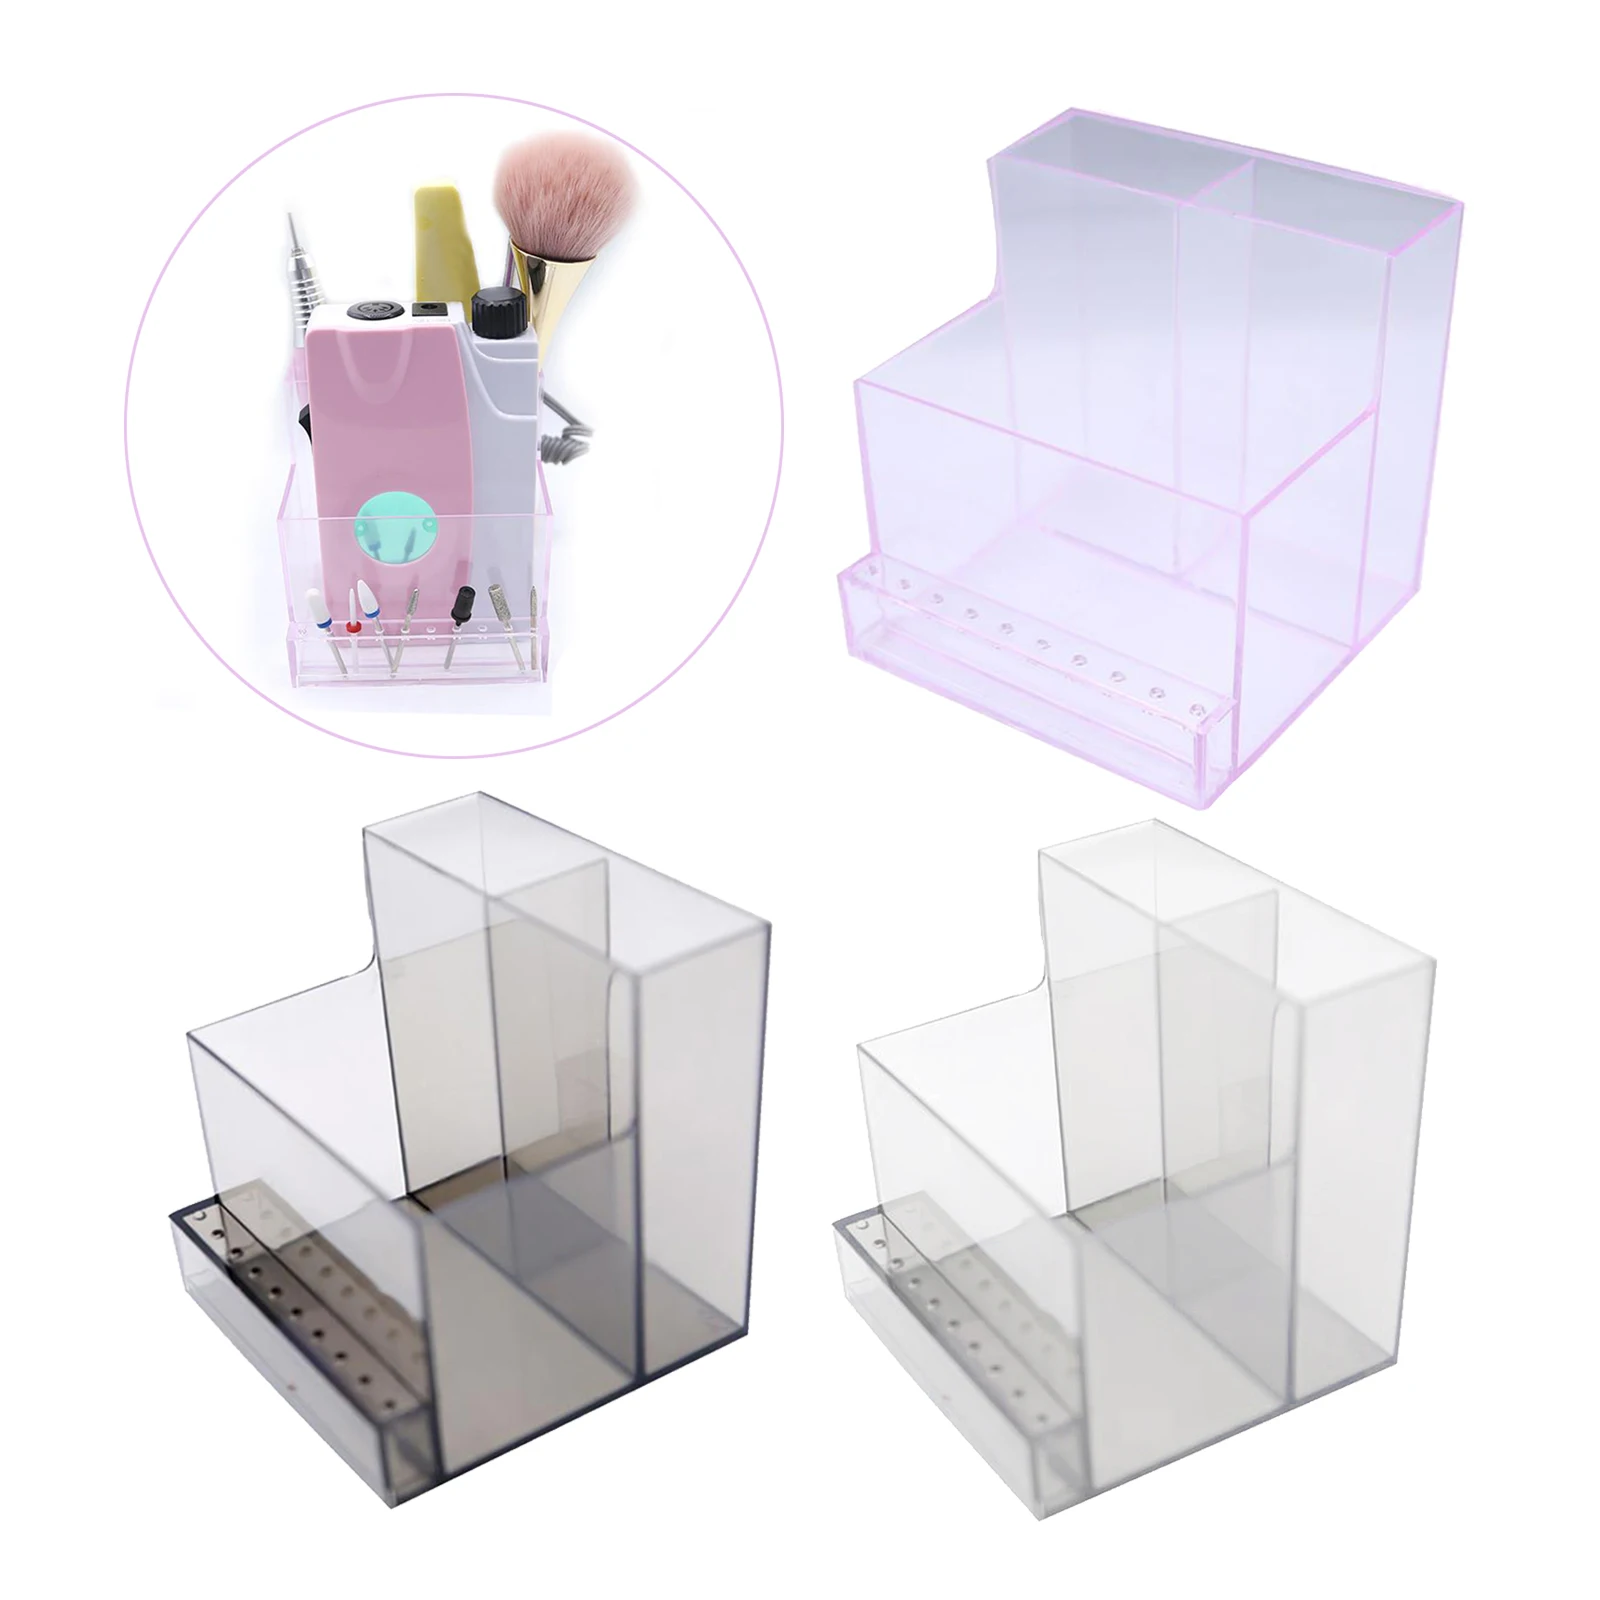 3 Rows 10 Holes Nail Drill Bits Holder Stand Tools Displayer Case Organizer